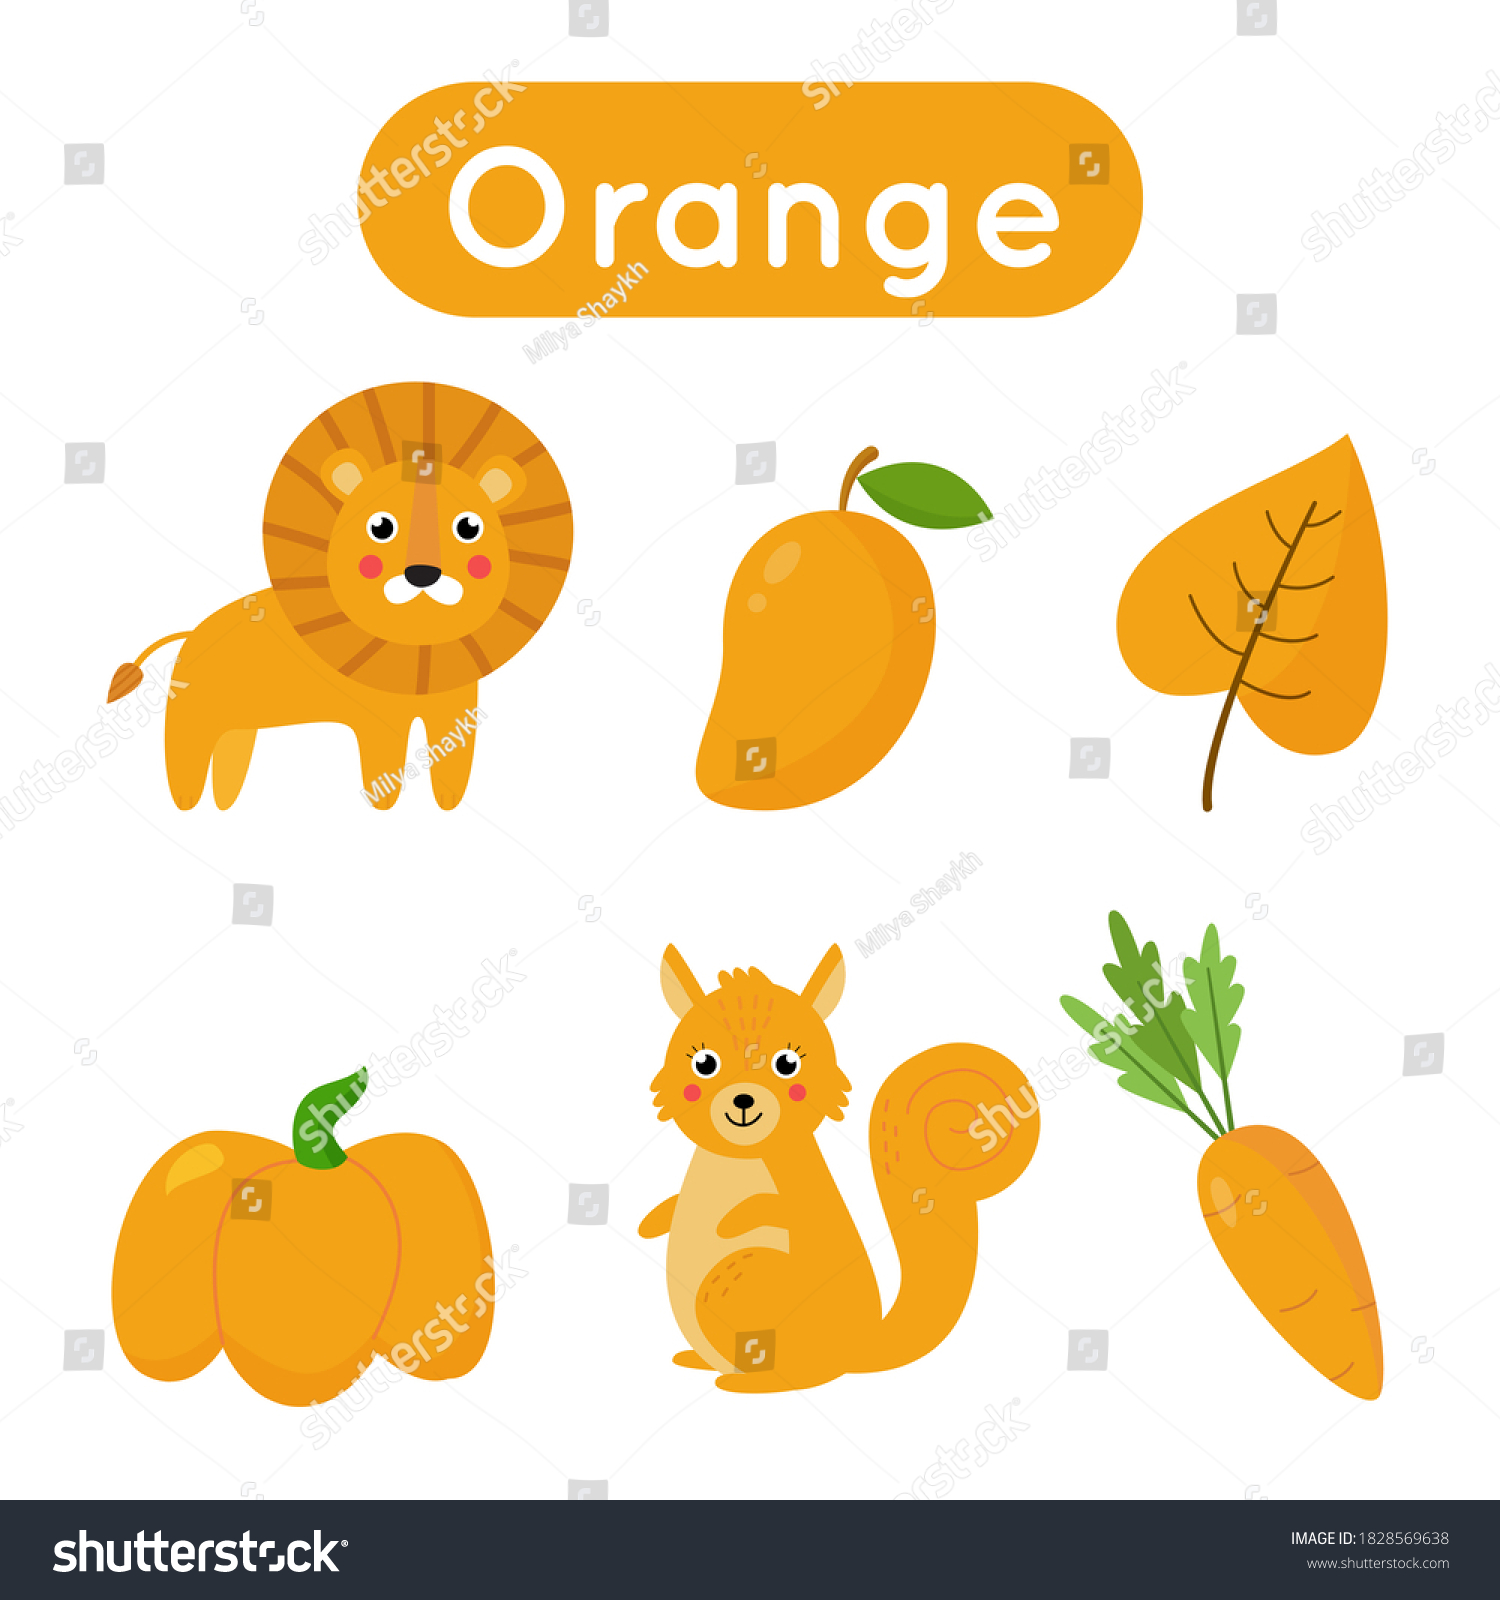 Flash Cards Learning Practicing Colors Objects Stock Vector ...